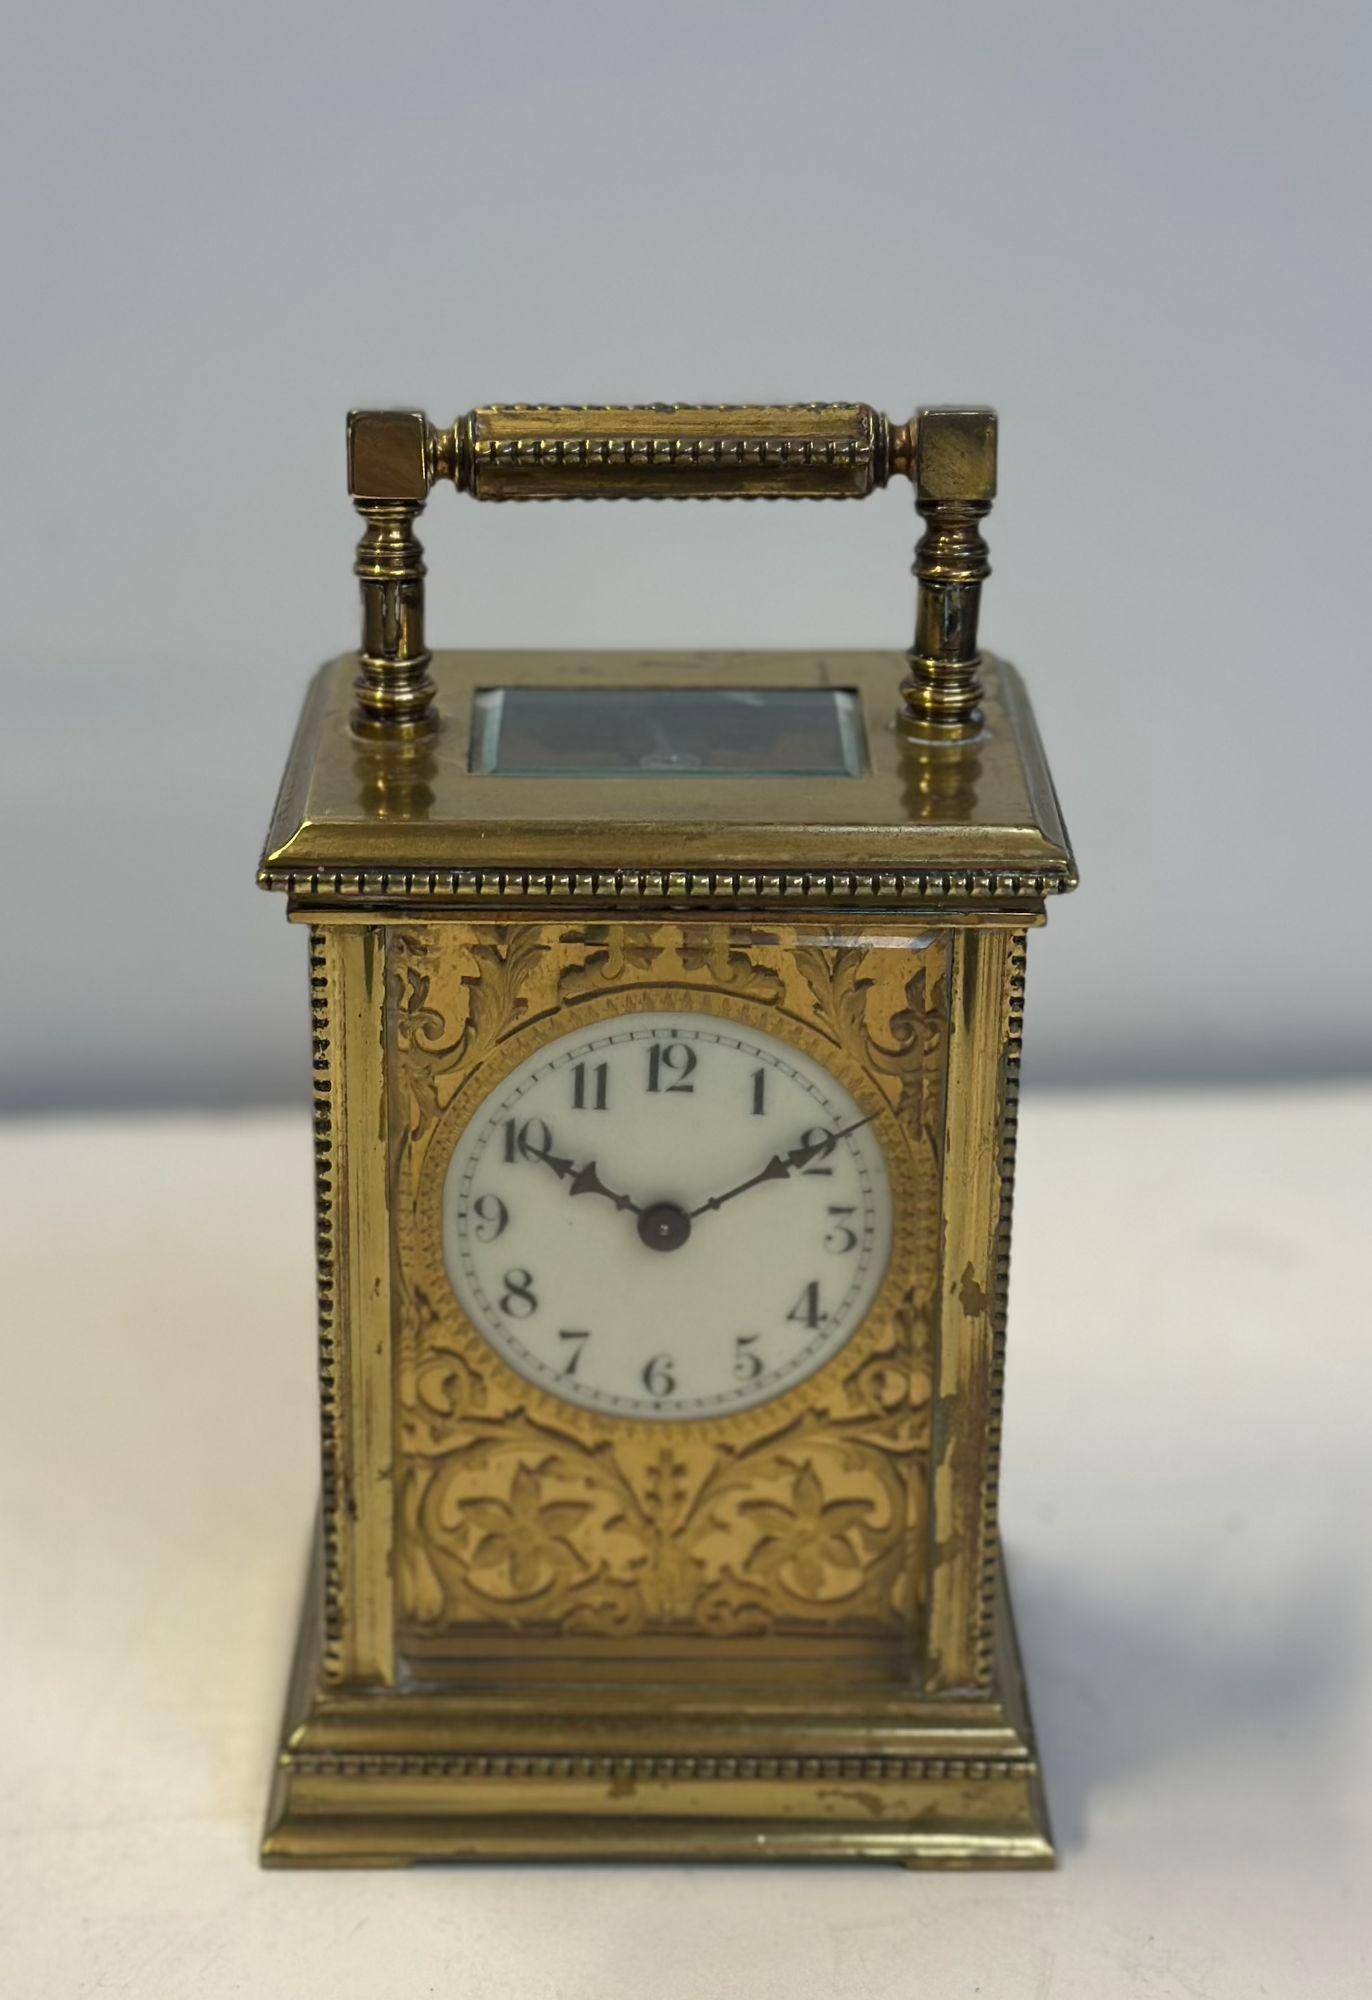 Beautiful traditional brass carriage clock made in France in the early 20th century. It is adorned with botanical details and glass protection.
Dimensions:
5.5